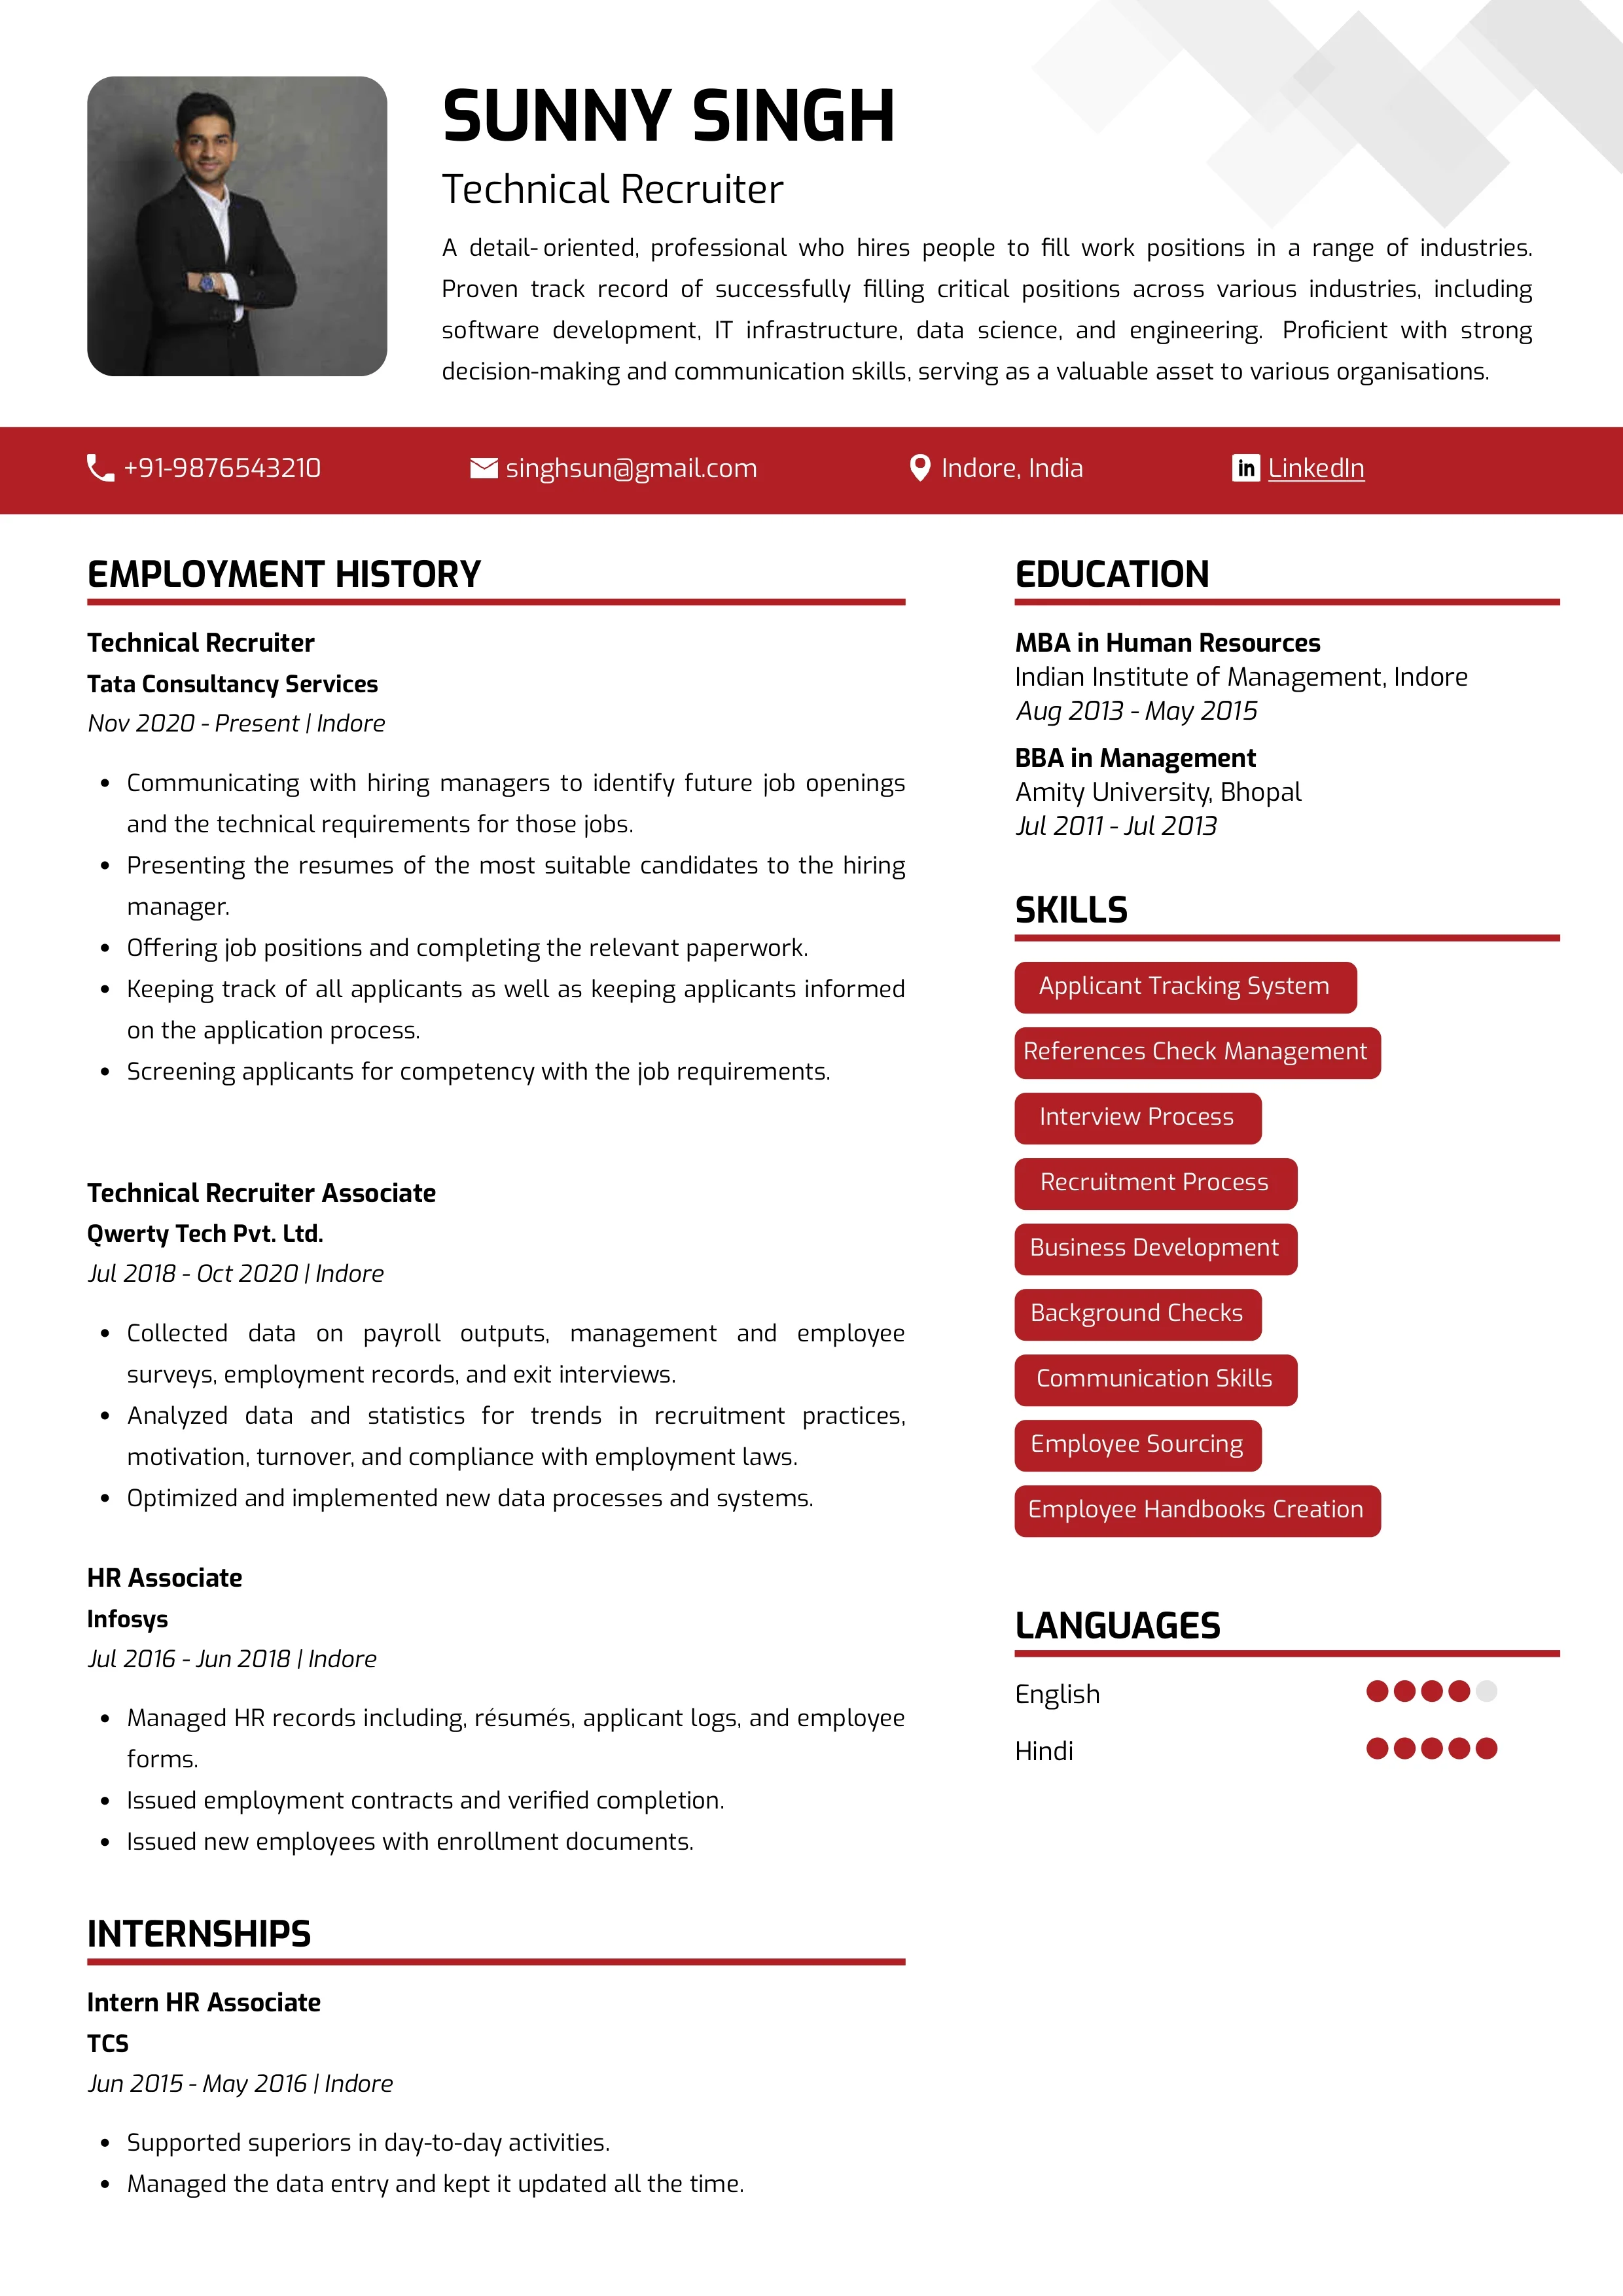 Sample Resume of Technical Recruiter | Free Resume Templates & Samples on Resumod.co